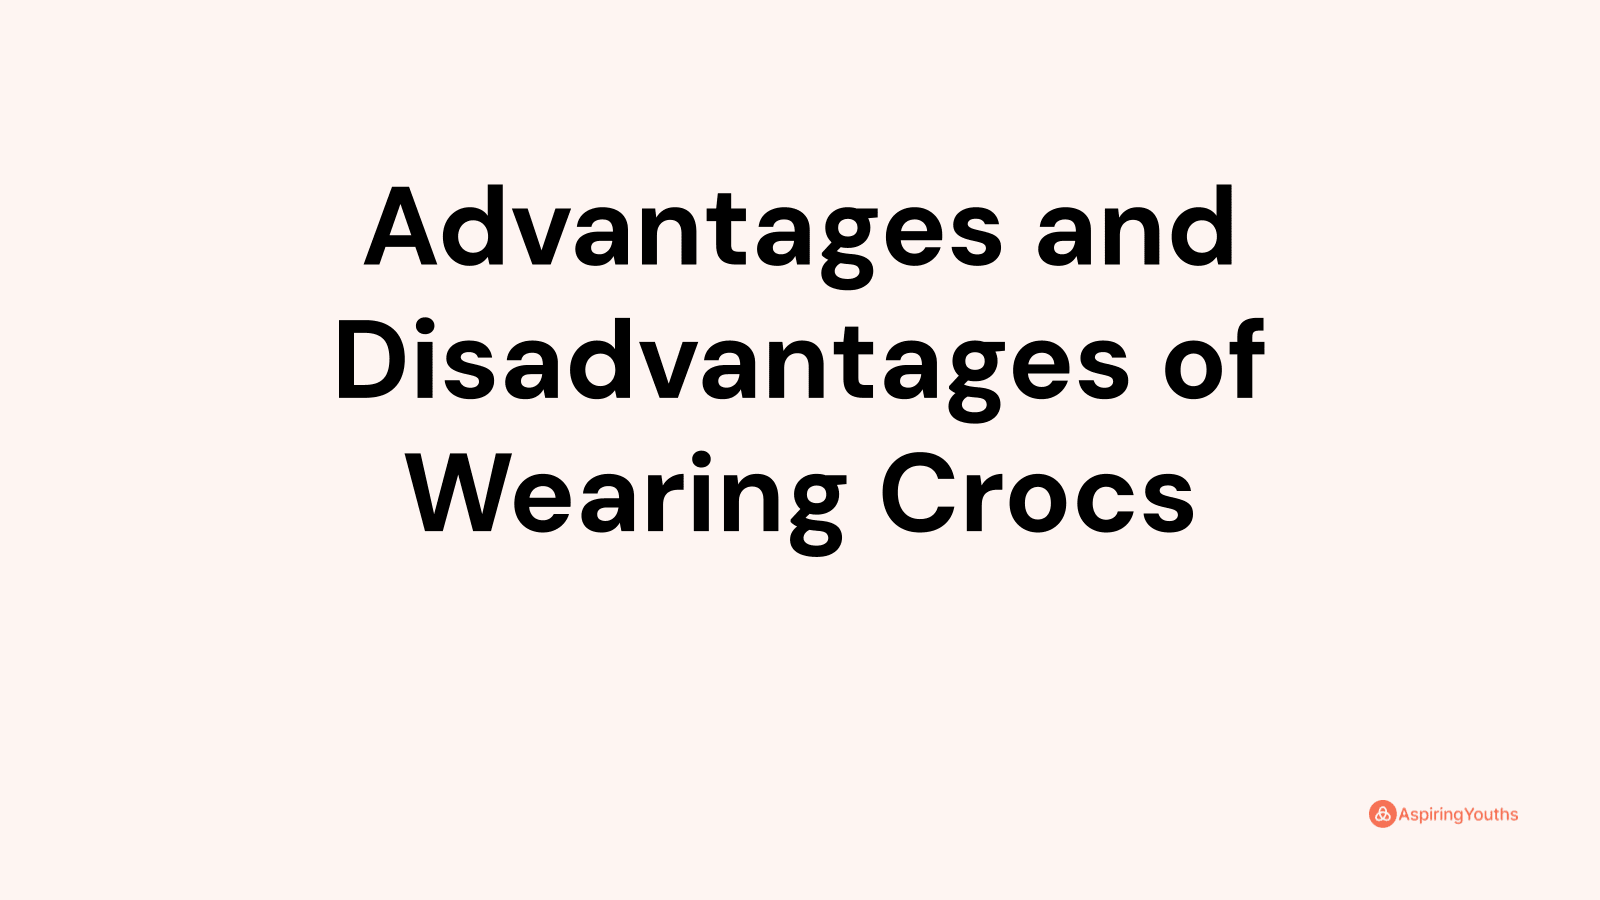 Advantages and disadvantages of Wearing Crocs